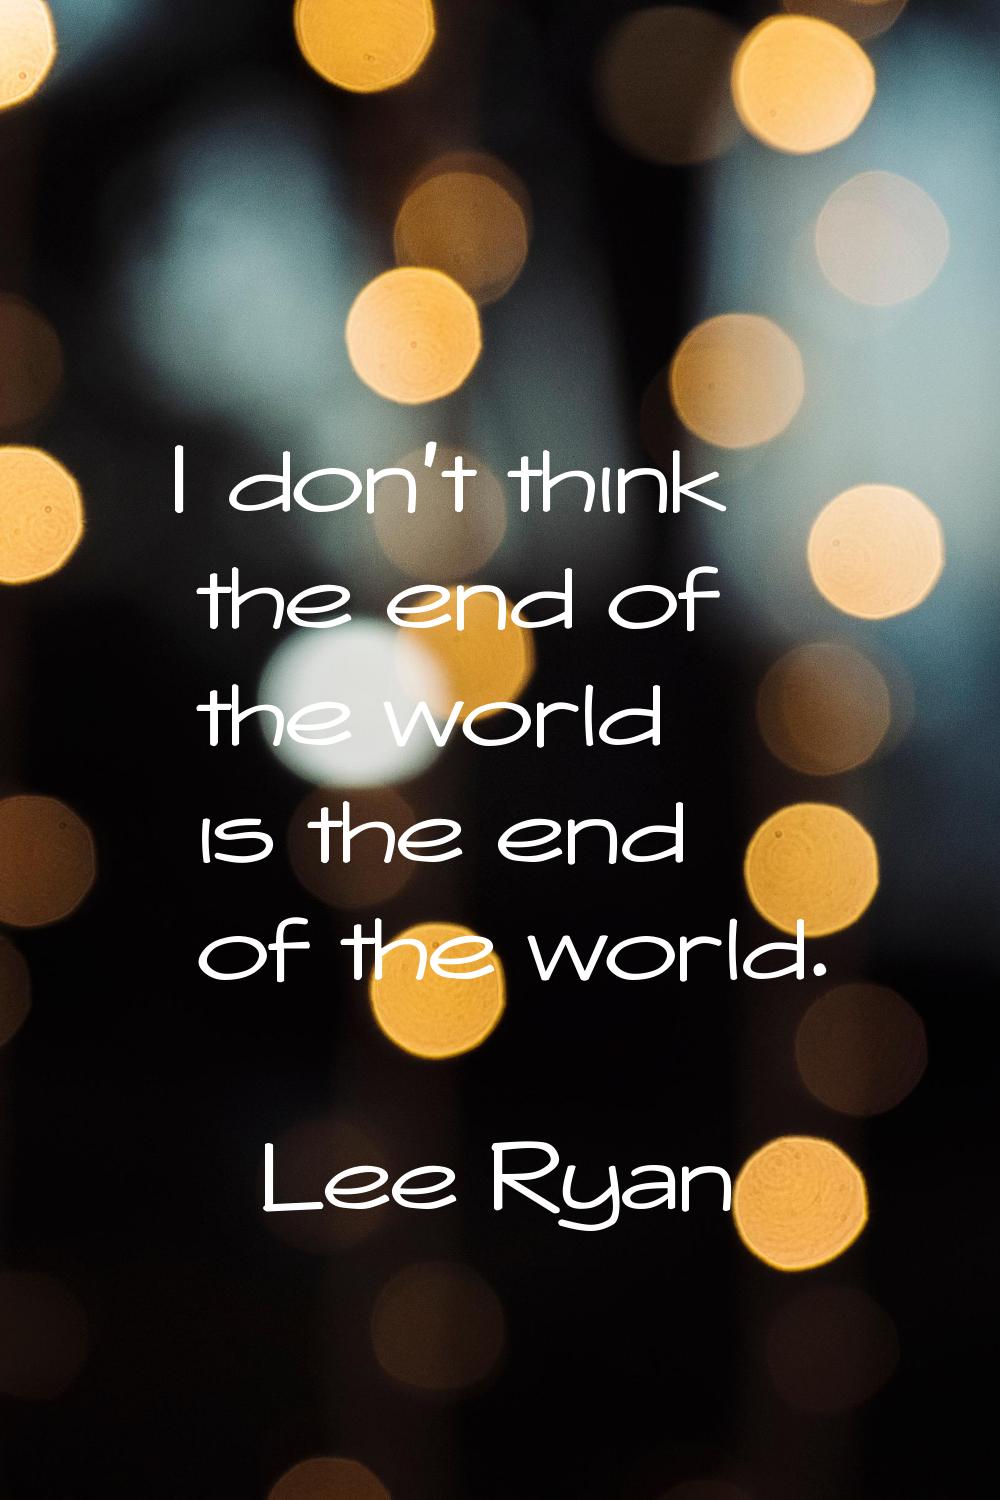 I don't think the end of the world is the end of the world.